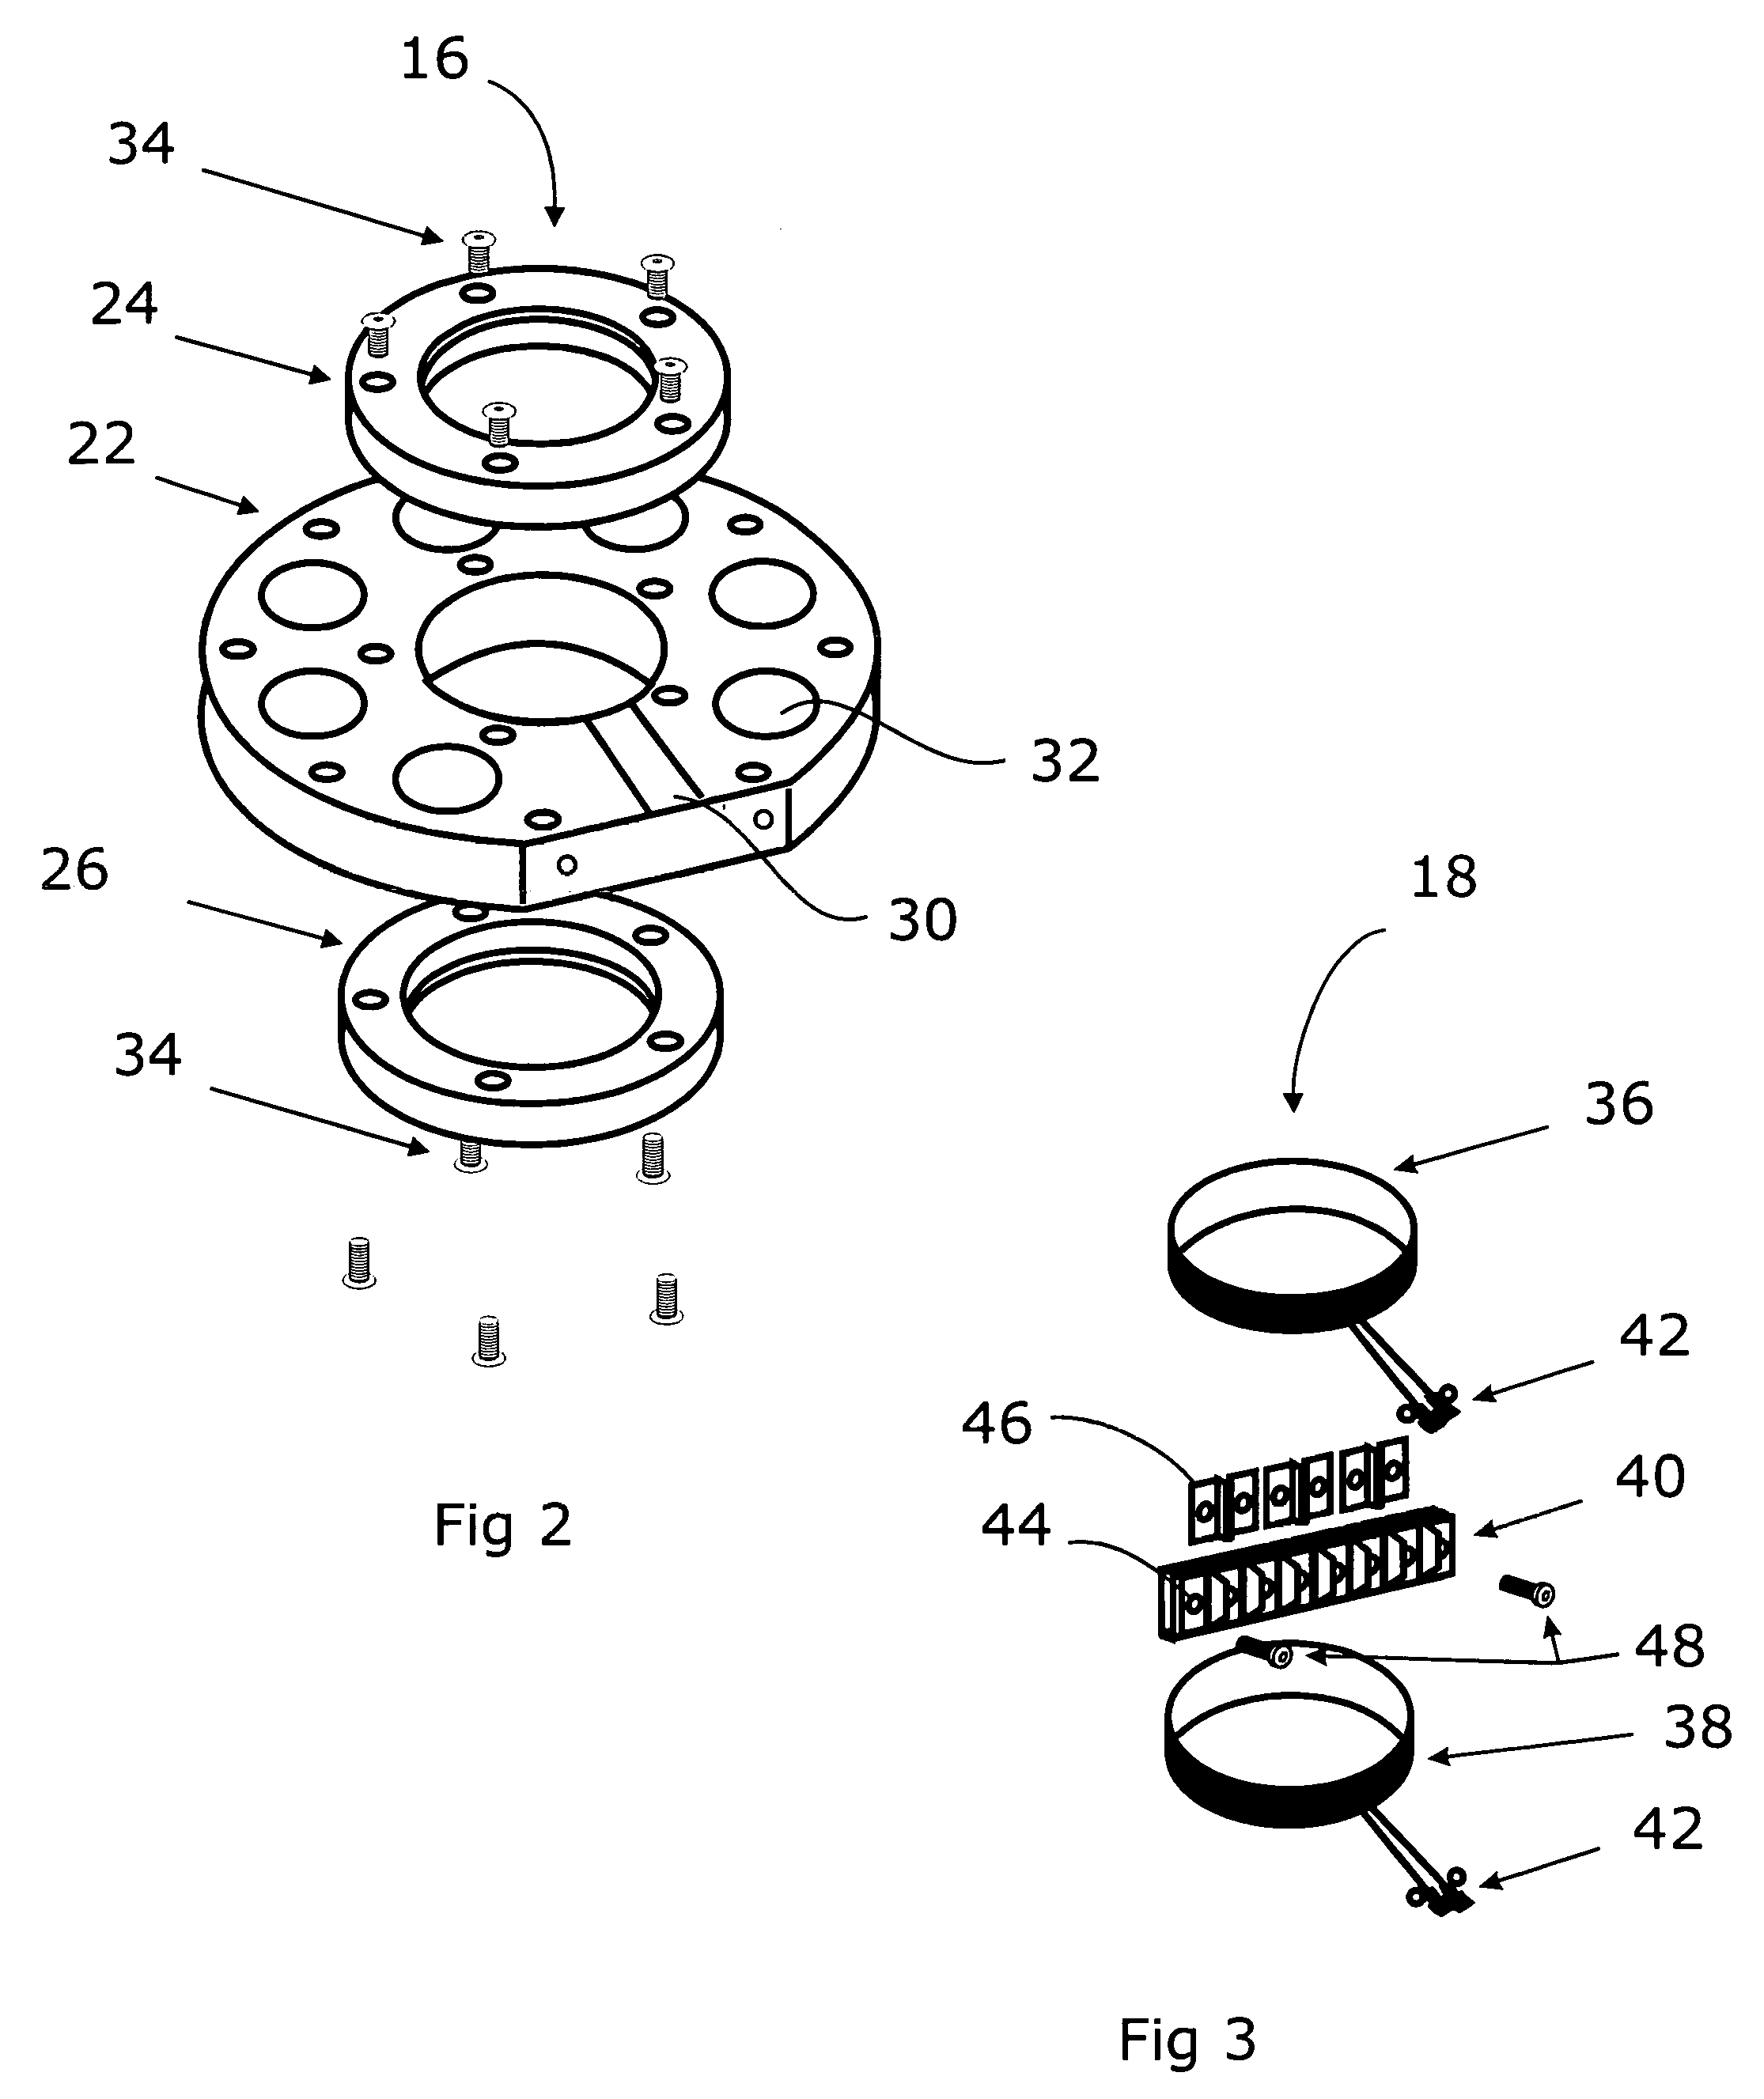 Transducer for tactile applications and apparatus incorporating transducers